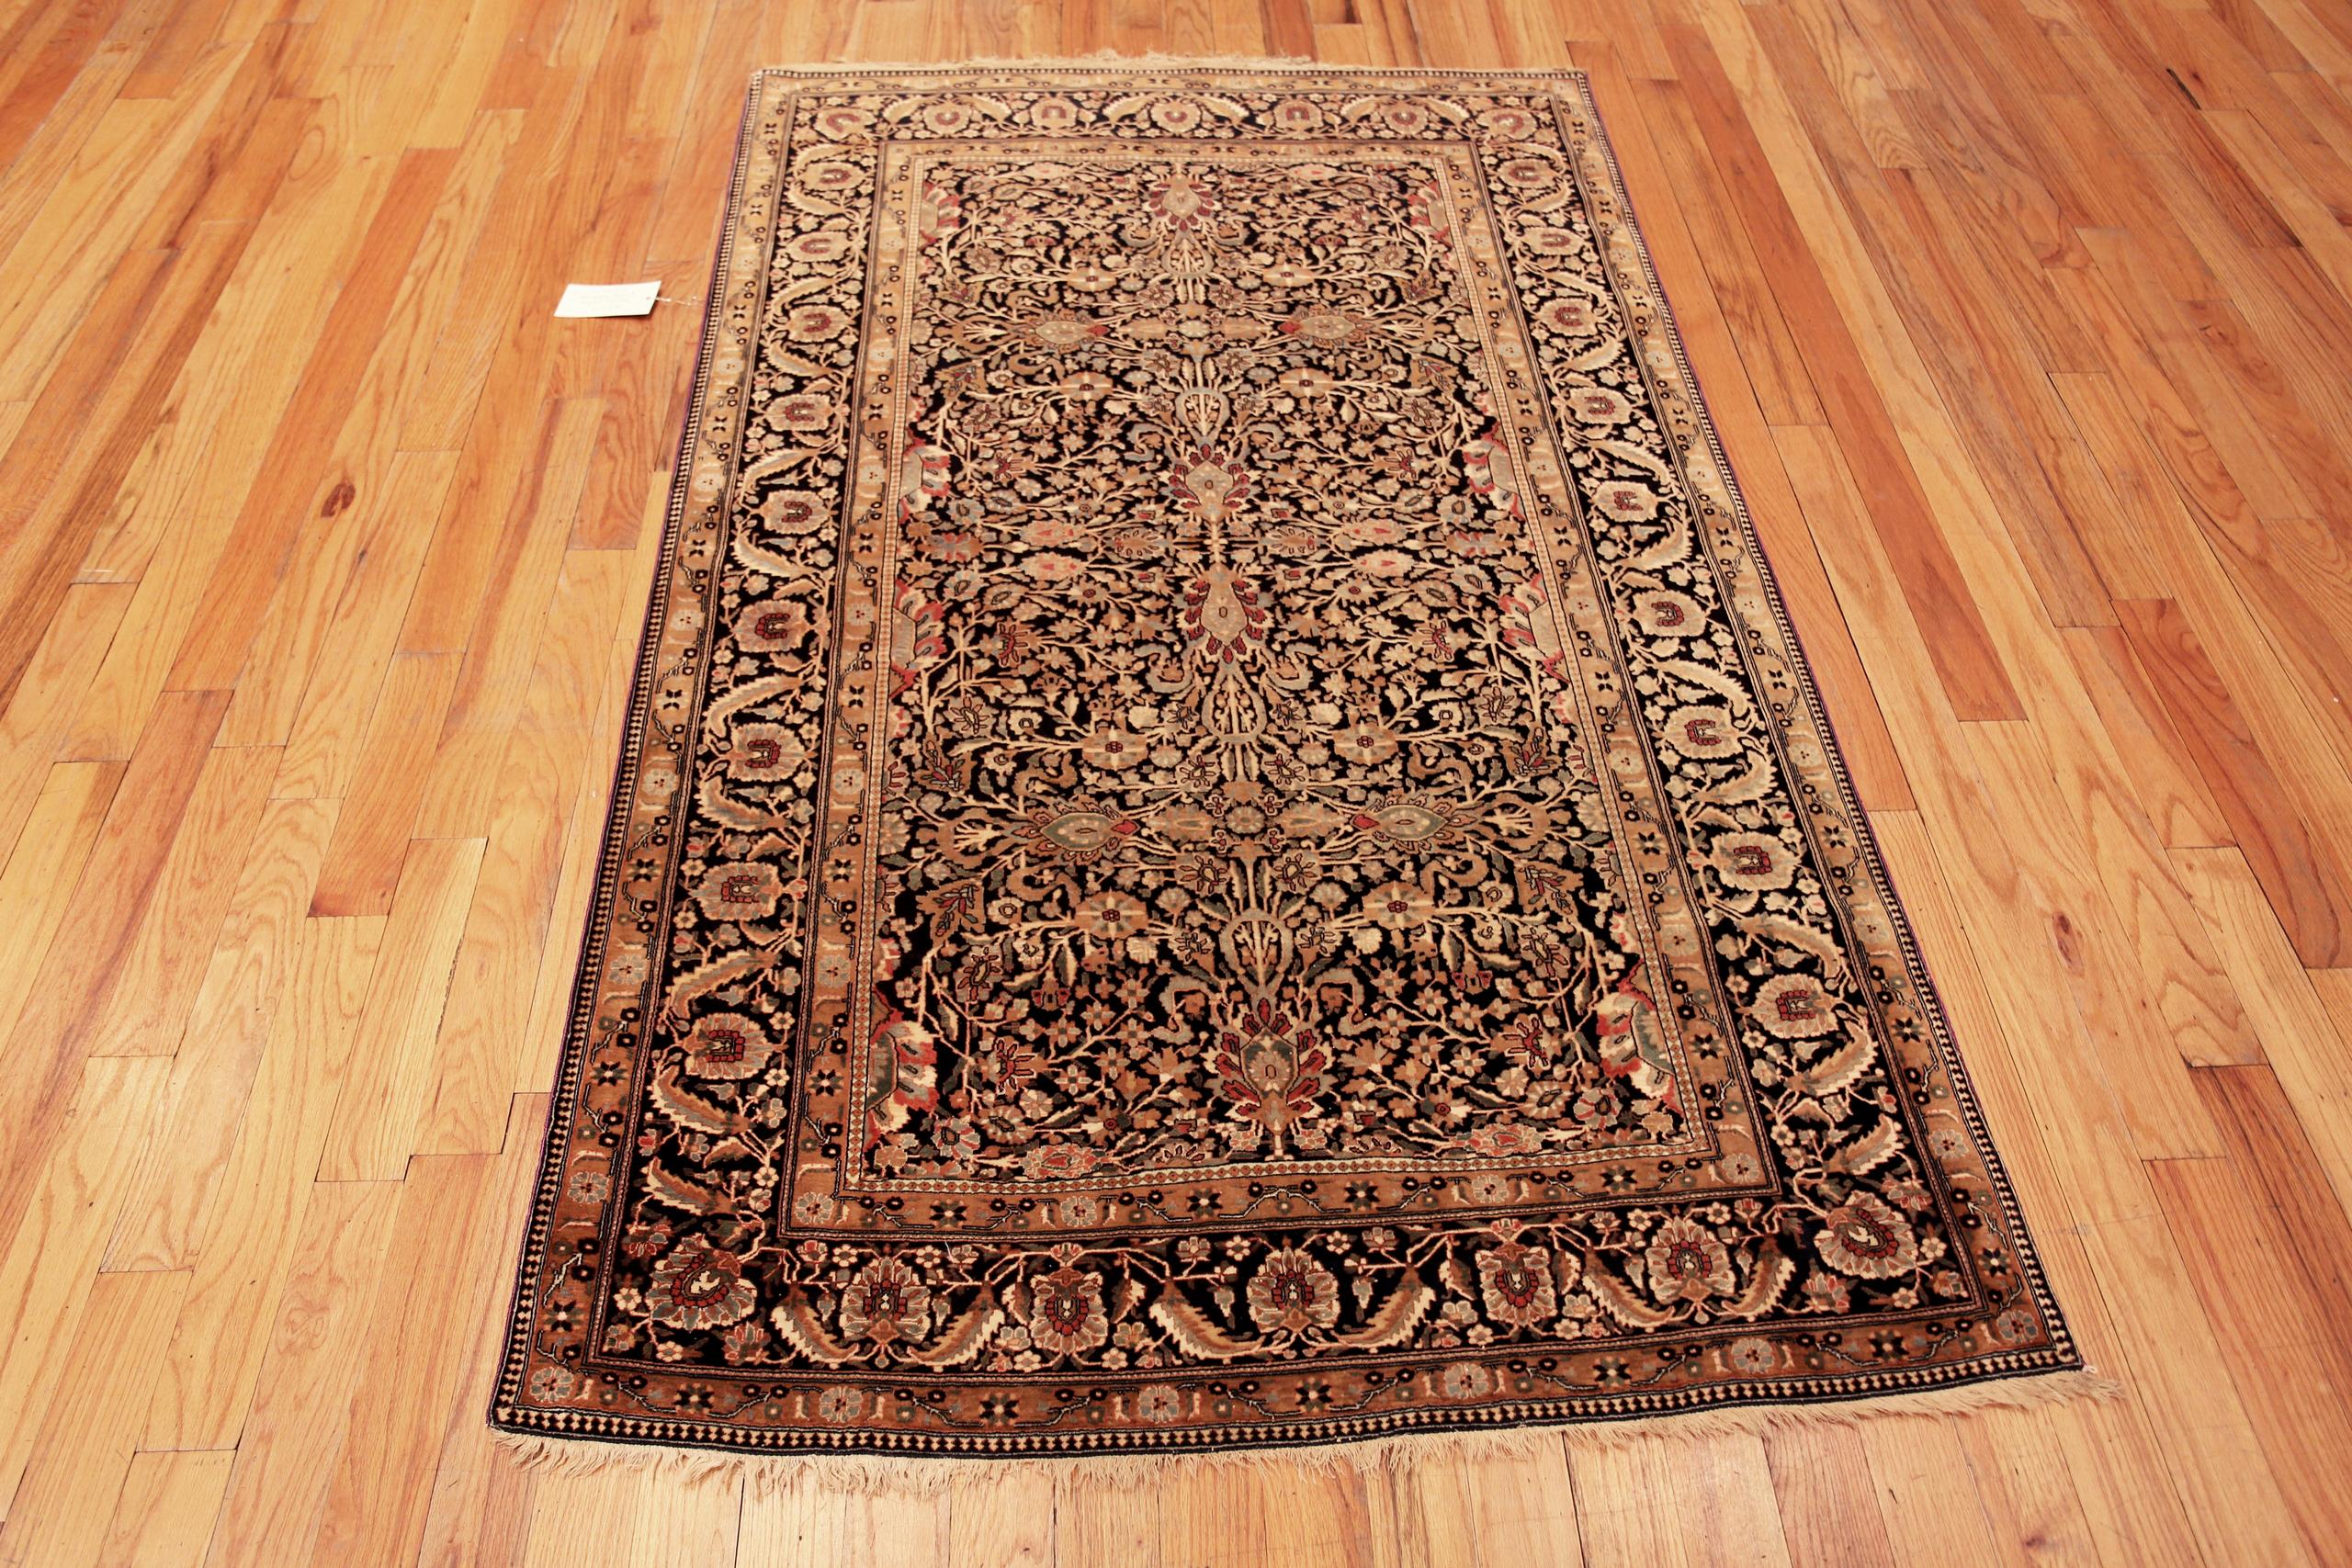 Fine Luxurious Formal Antique Traditional Persian Mohtasham Kashan Rug, Country of Origin: Persia, Circa date: 1880. Size: 4 ft 4 in x 6 ft 10 in (1.32 m x 2.08 m)

 